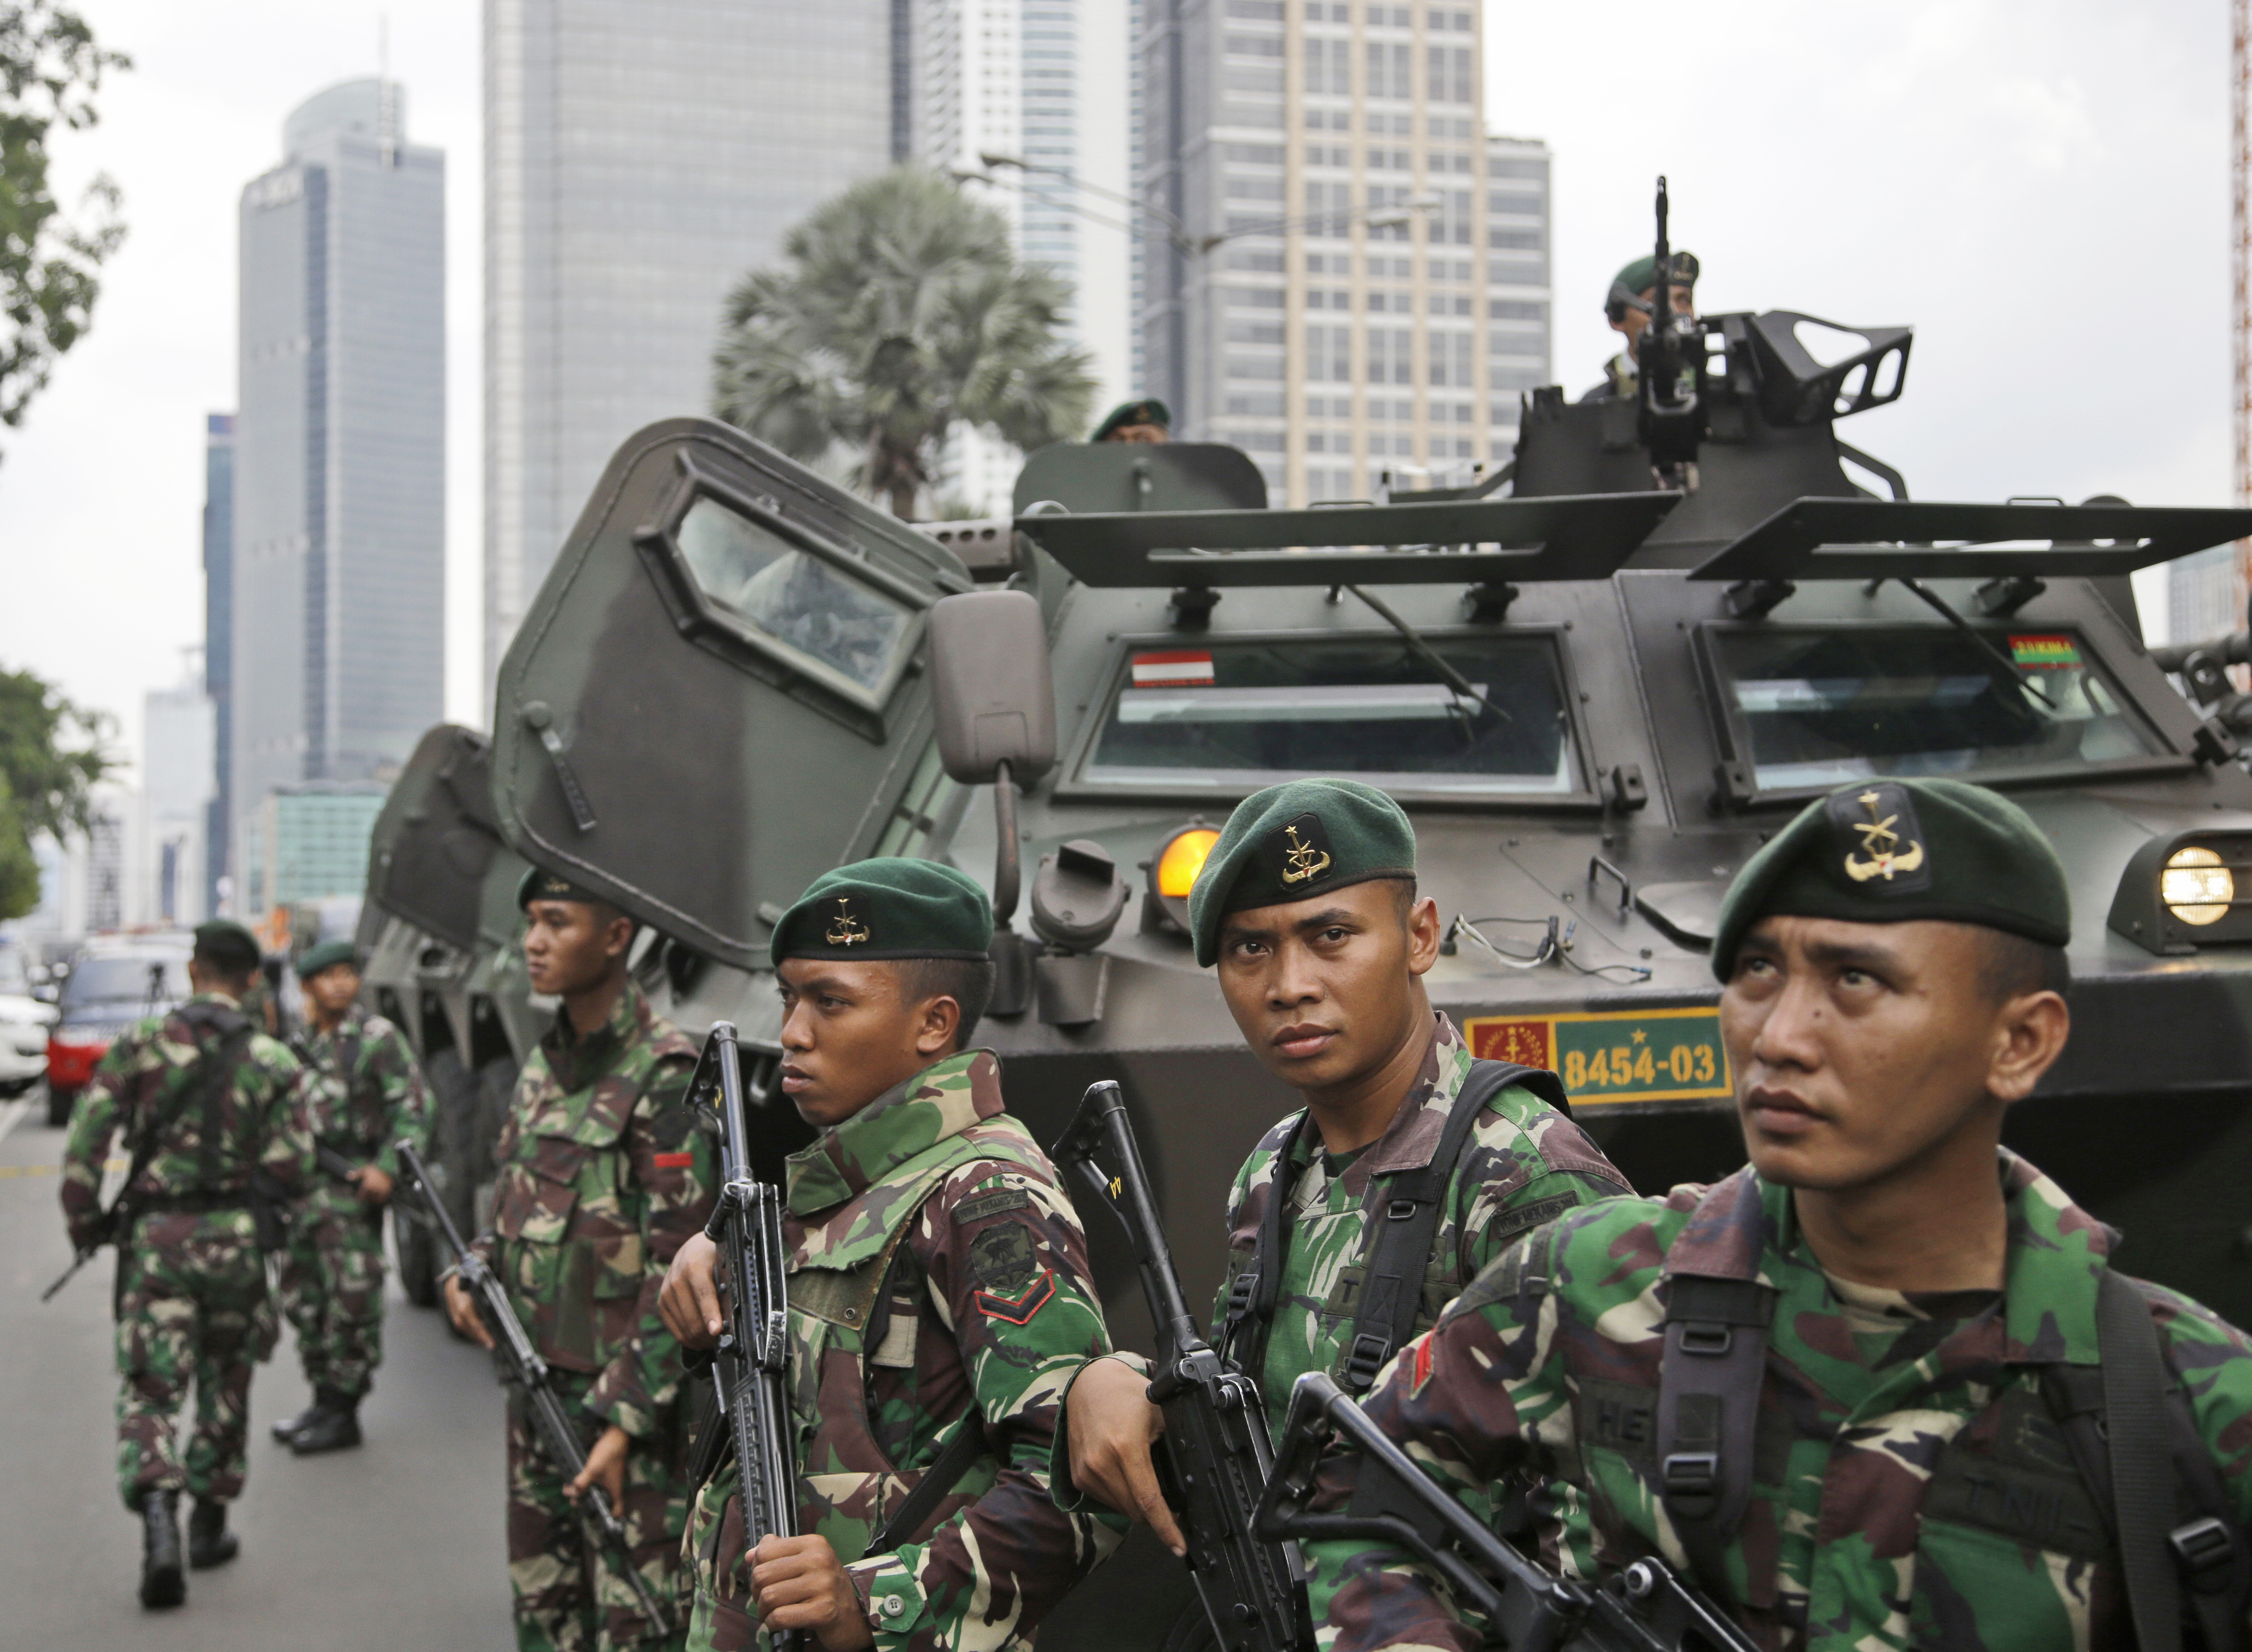 Indonesian soldiers stand guard near the site where an explosion went off in Jakarta, Indonesia, Jan. 14, 2016. (Dita Alangkara—AP)